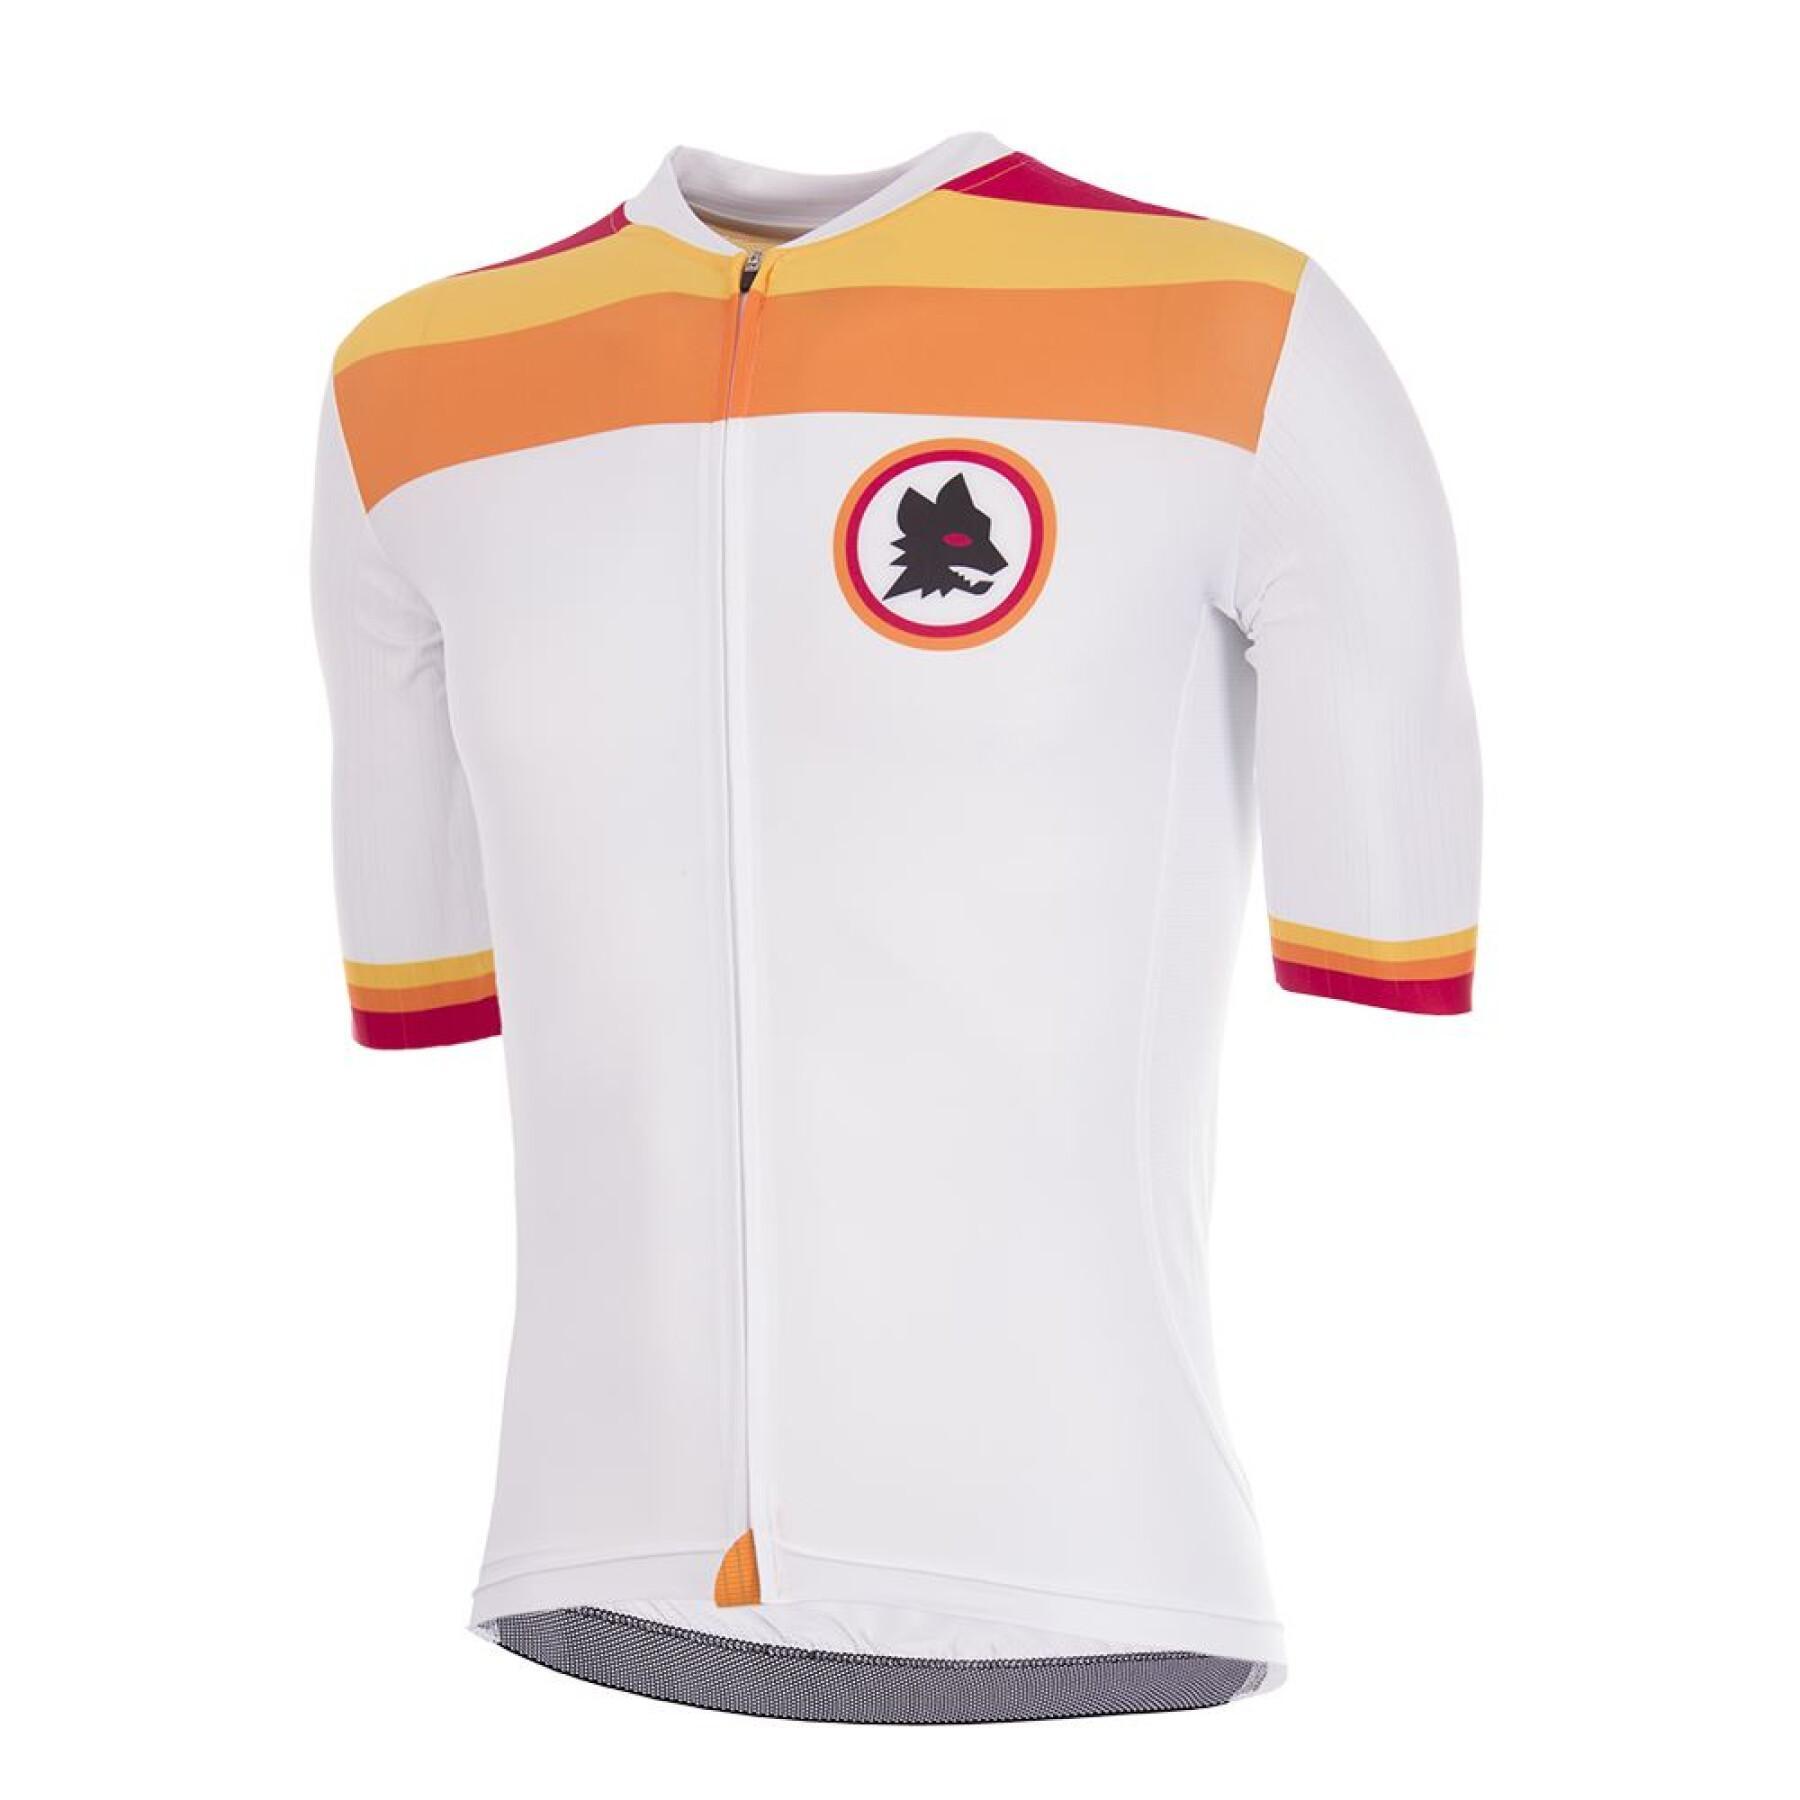 Outdoor cycling jersey Copa A.S Roma